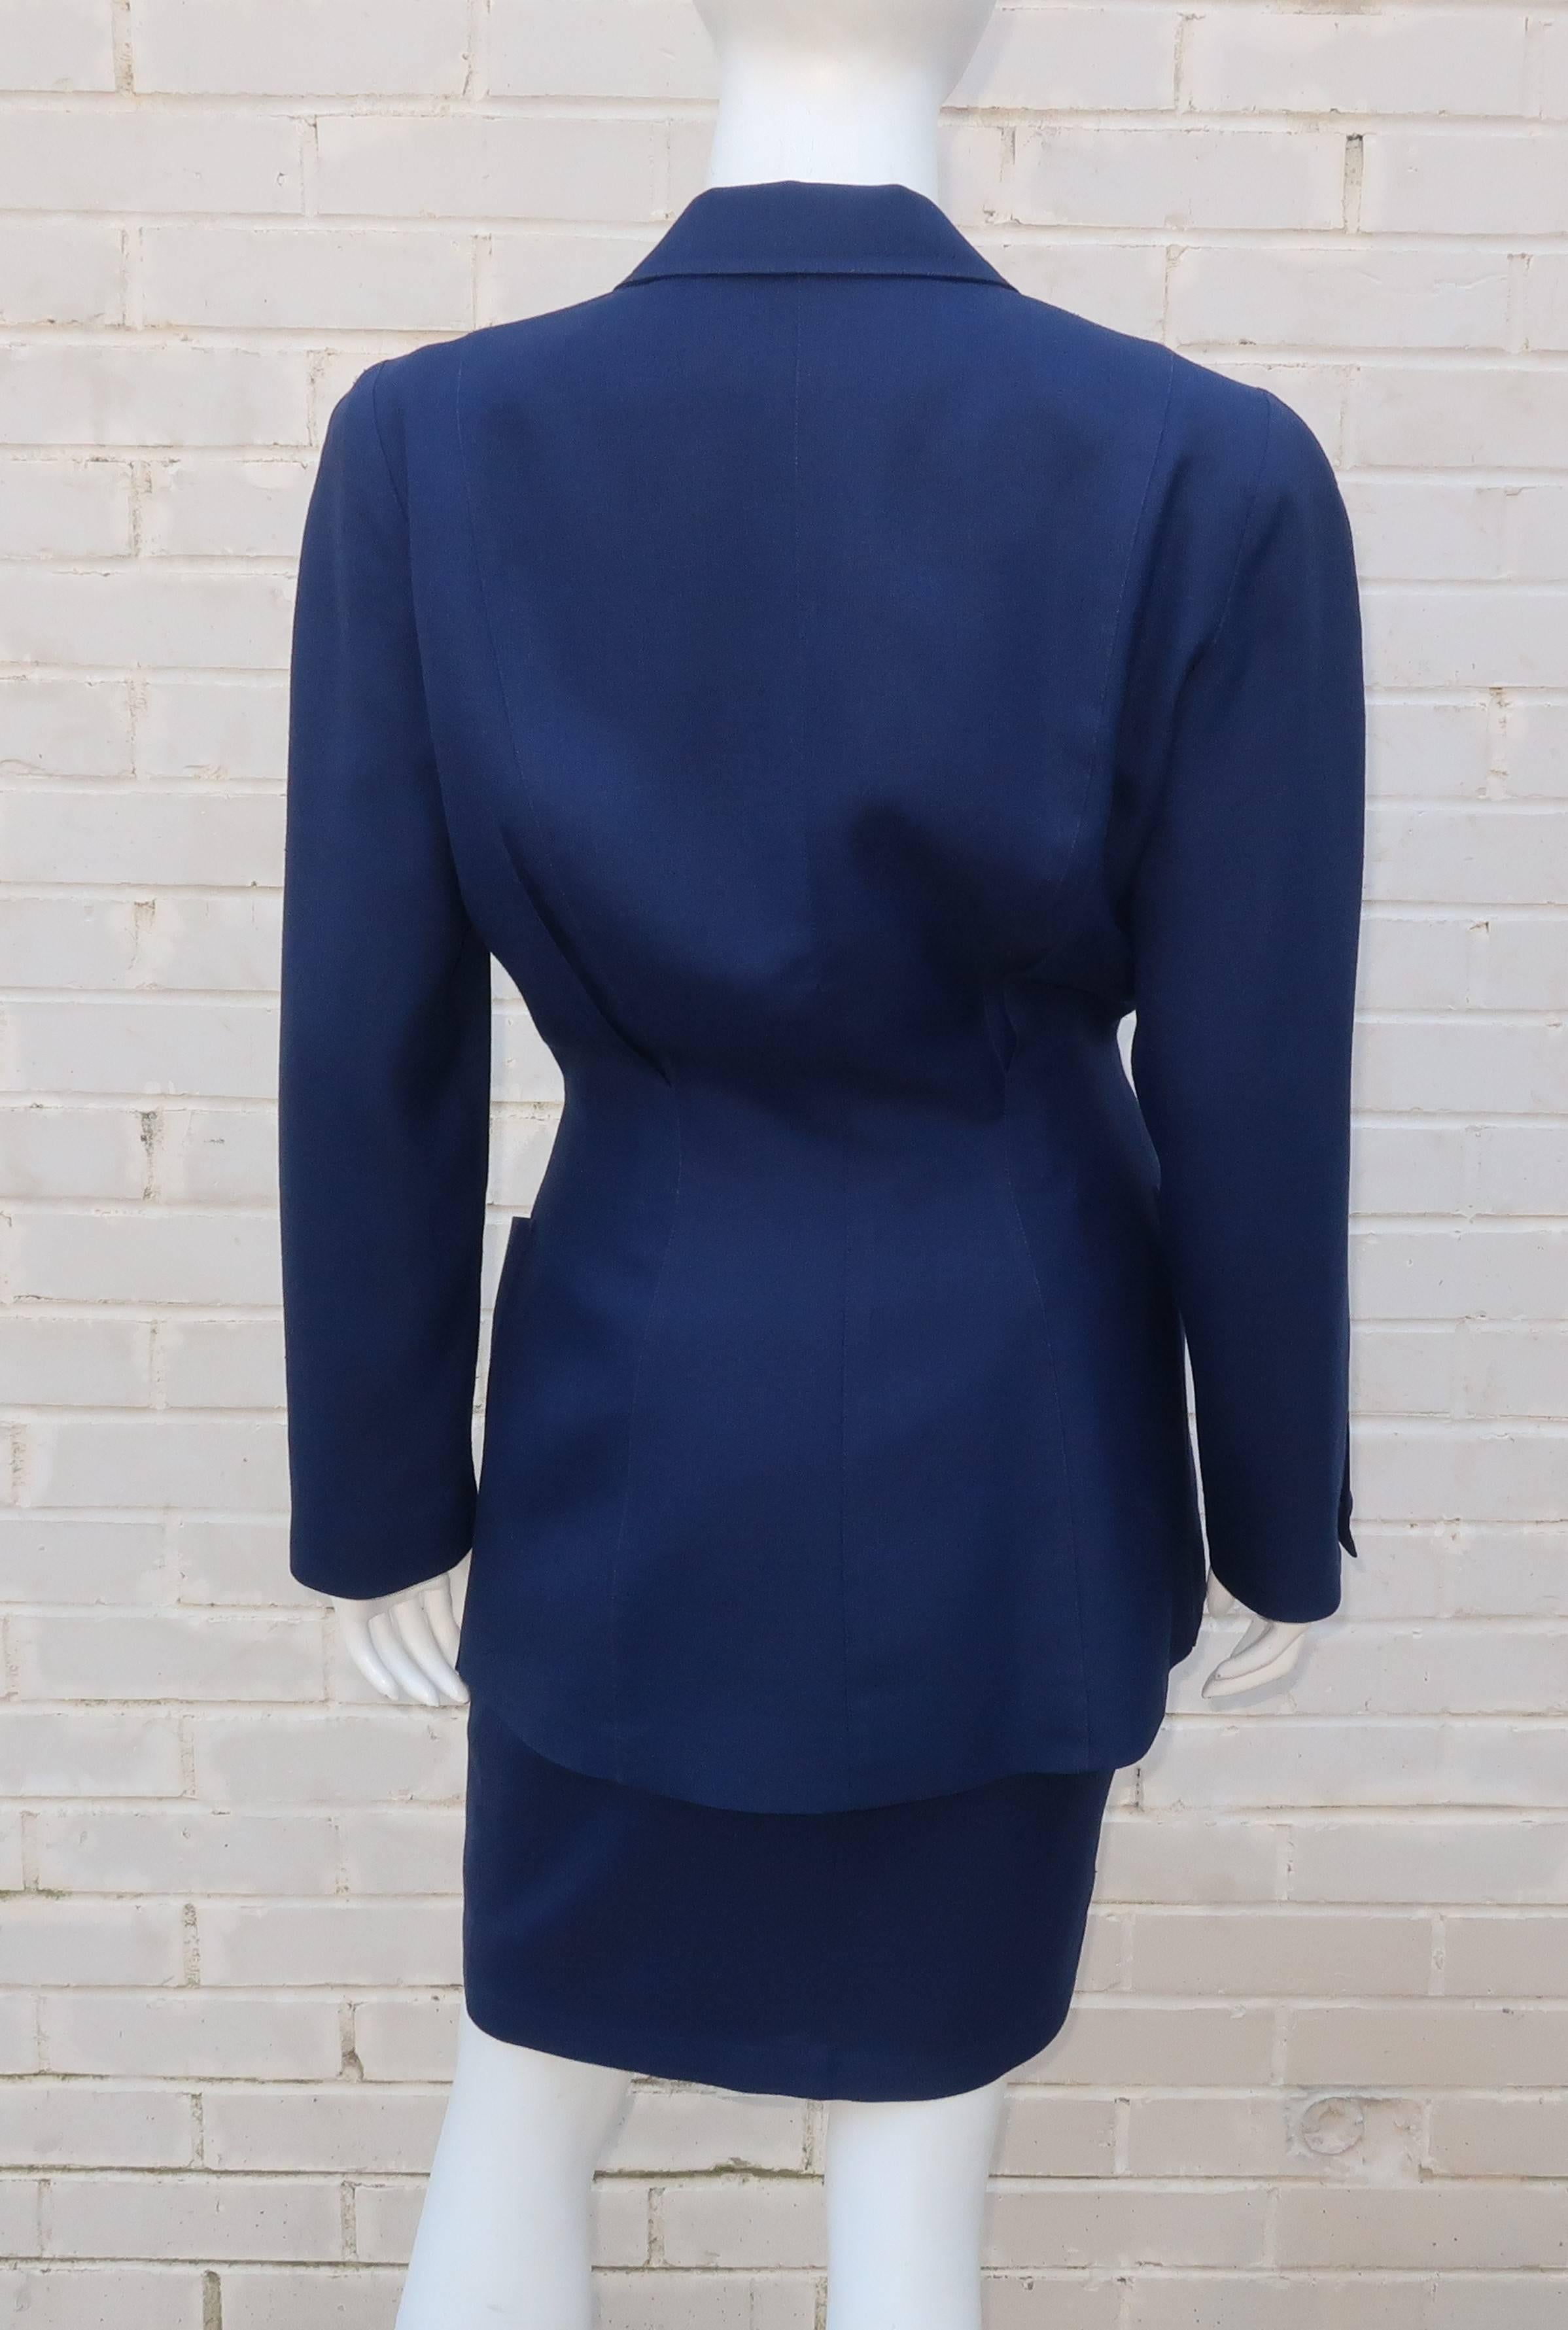 Women's Vintage Thierry Mugler Blue Linen Skirt Suit With Star Buttons